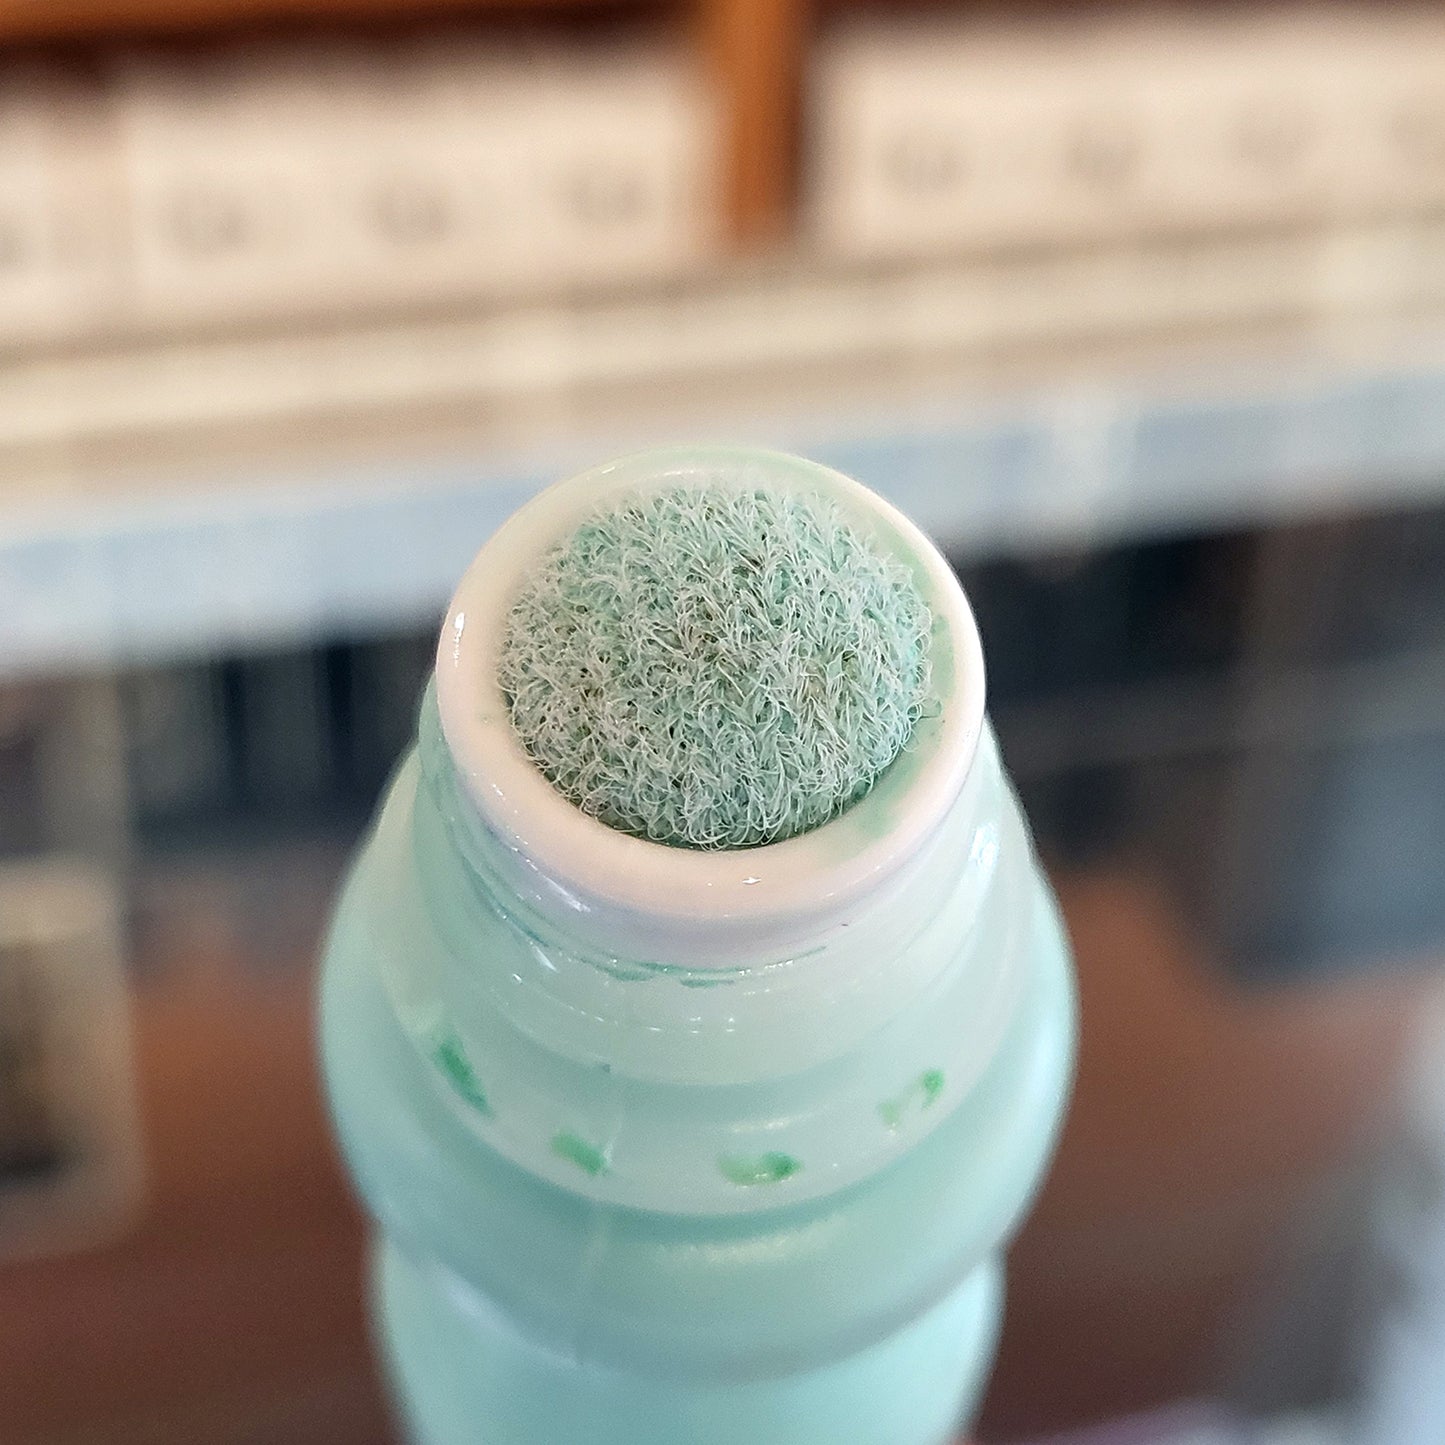 A close up photo of a textured felt marker nib, marker color is aqua with a blurred background.